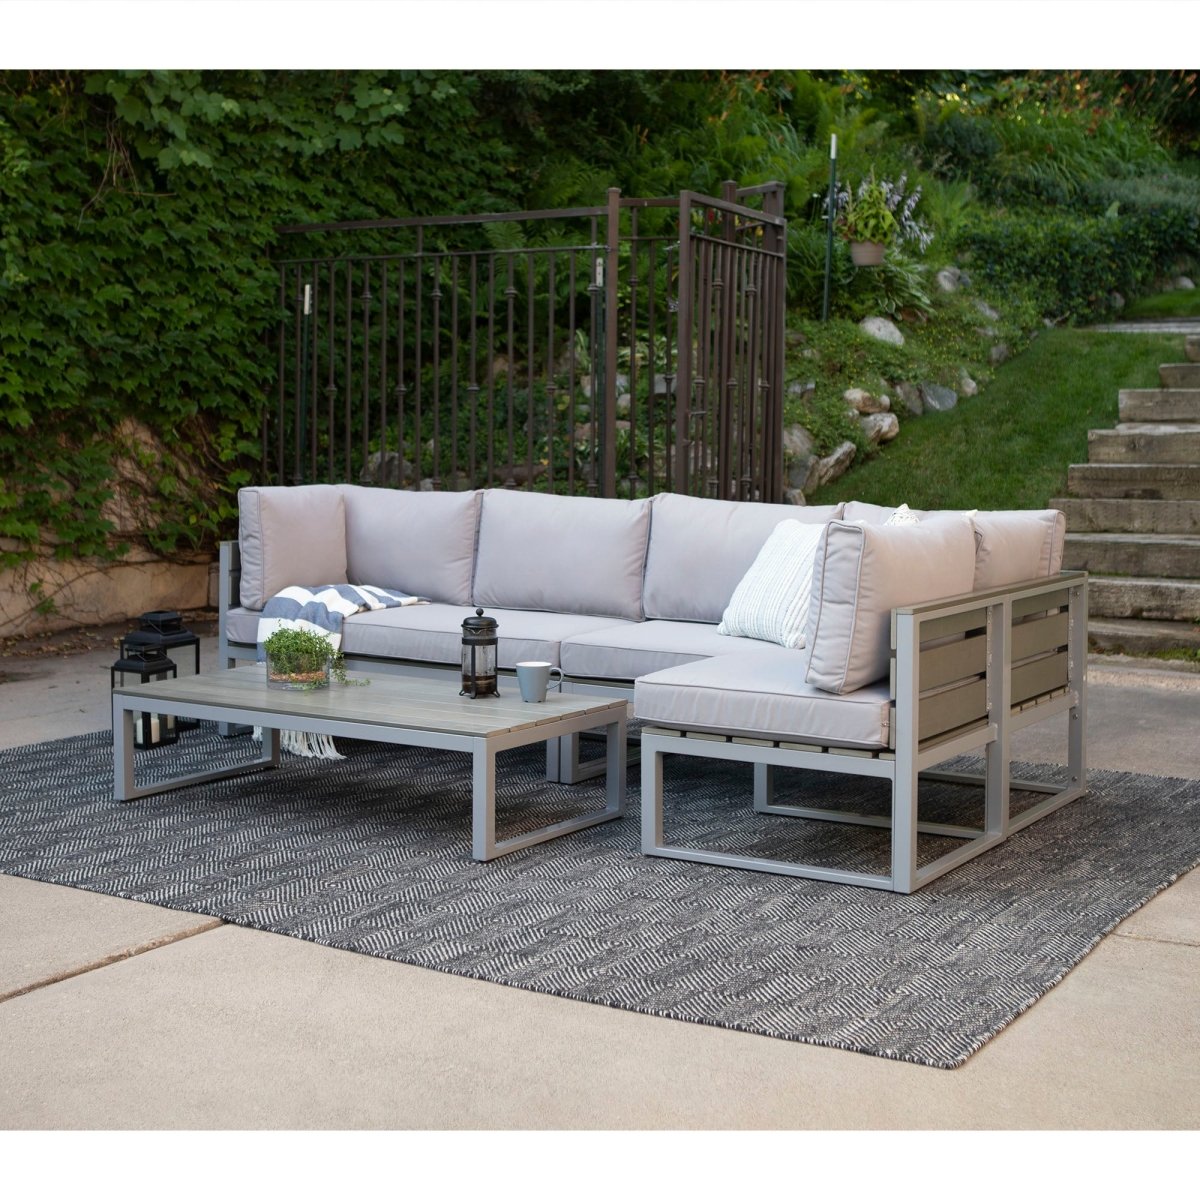 Walker Edison 4-Piece Jane Outdoor Patio Conversation Set with Cushions - lily & onyx